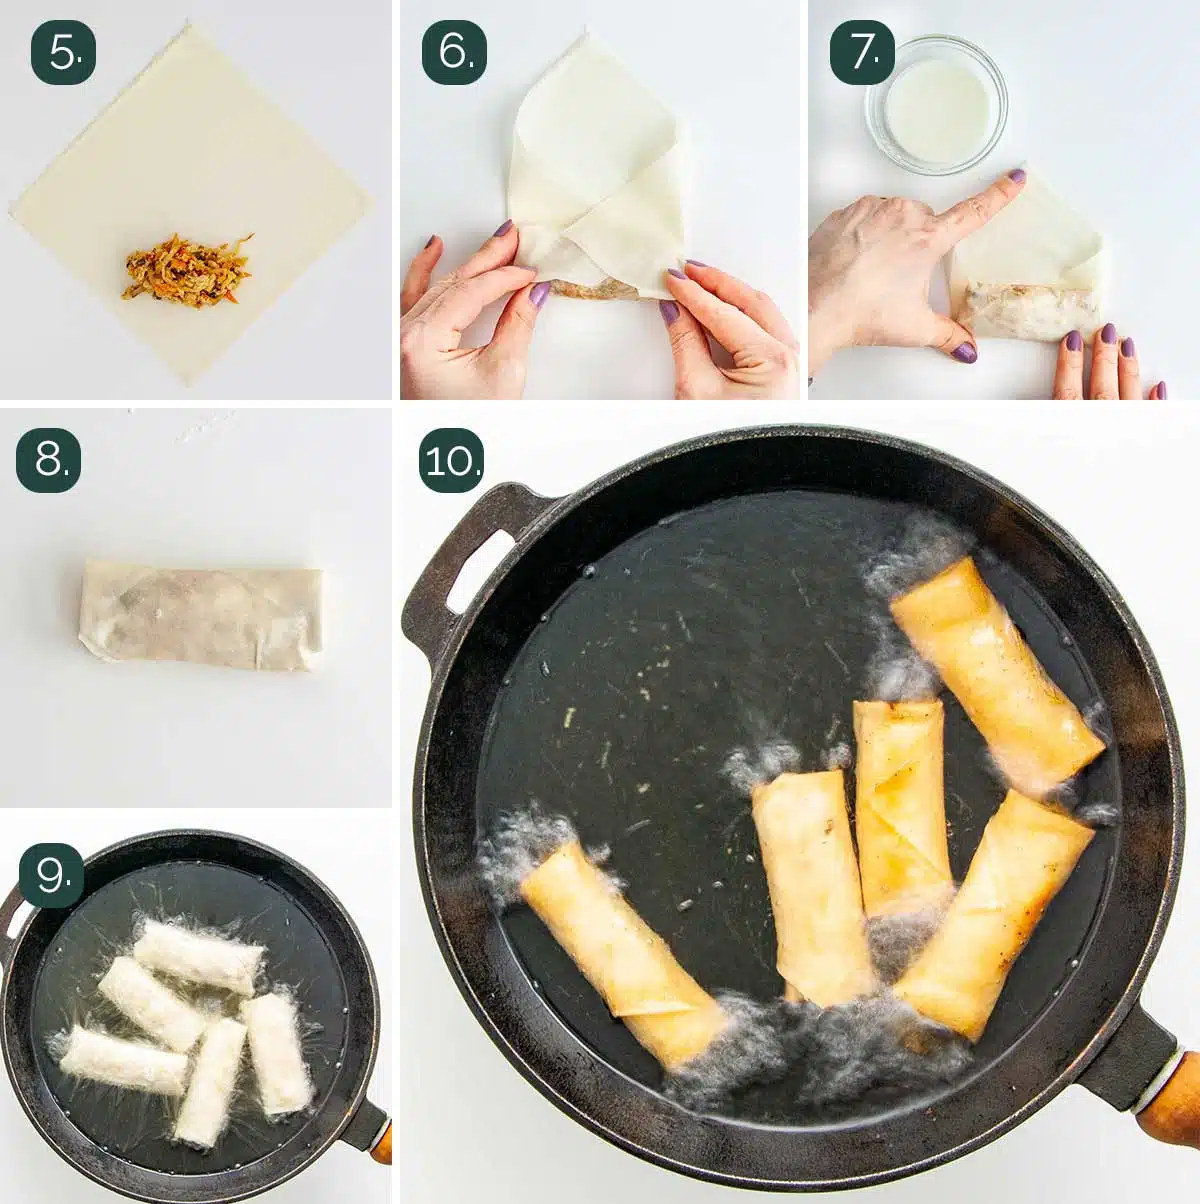 process shots showing how to fold spring rolls and fry them.